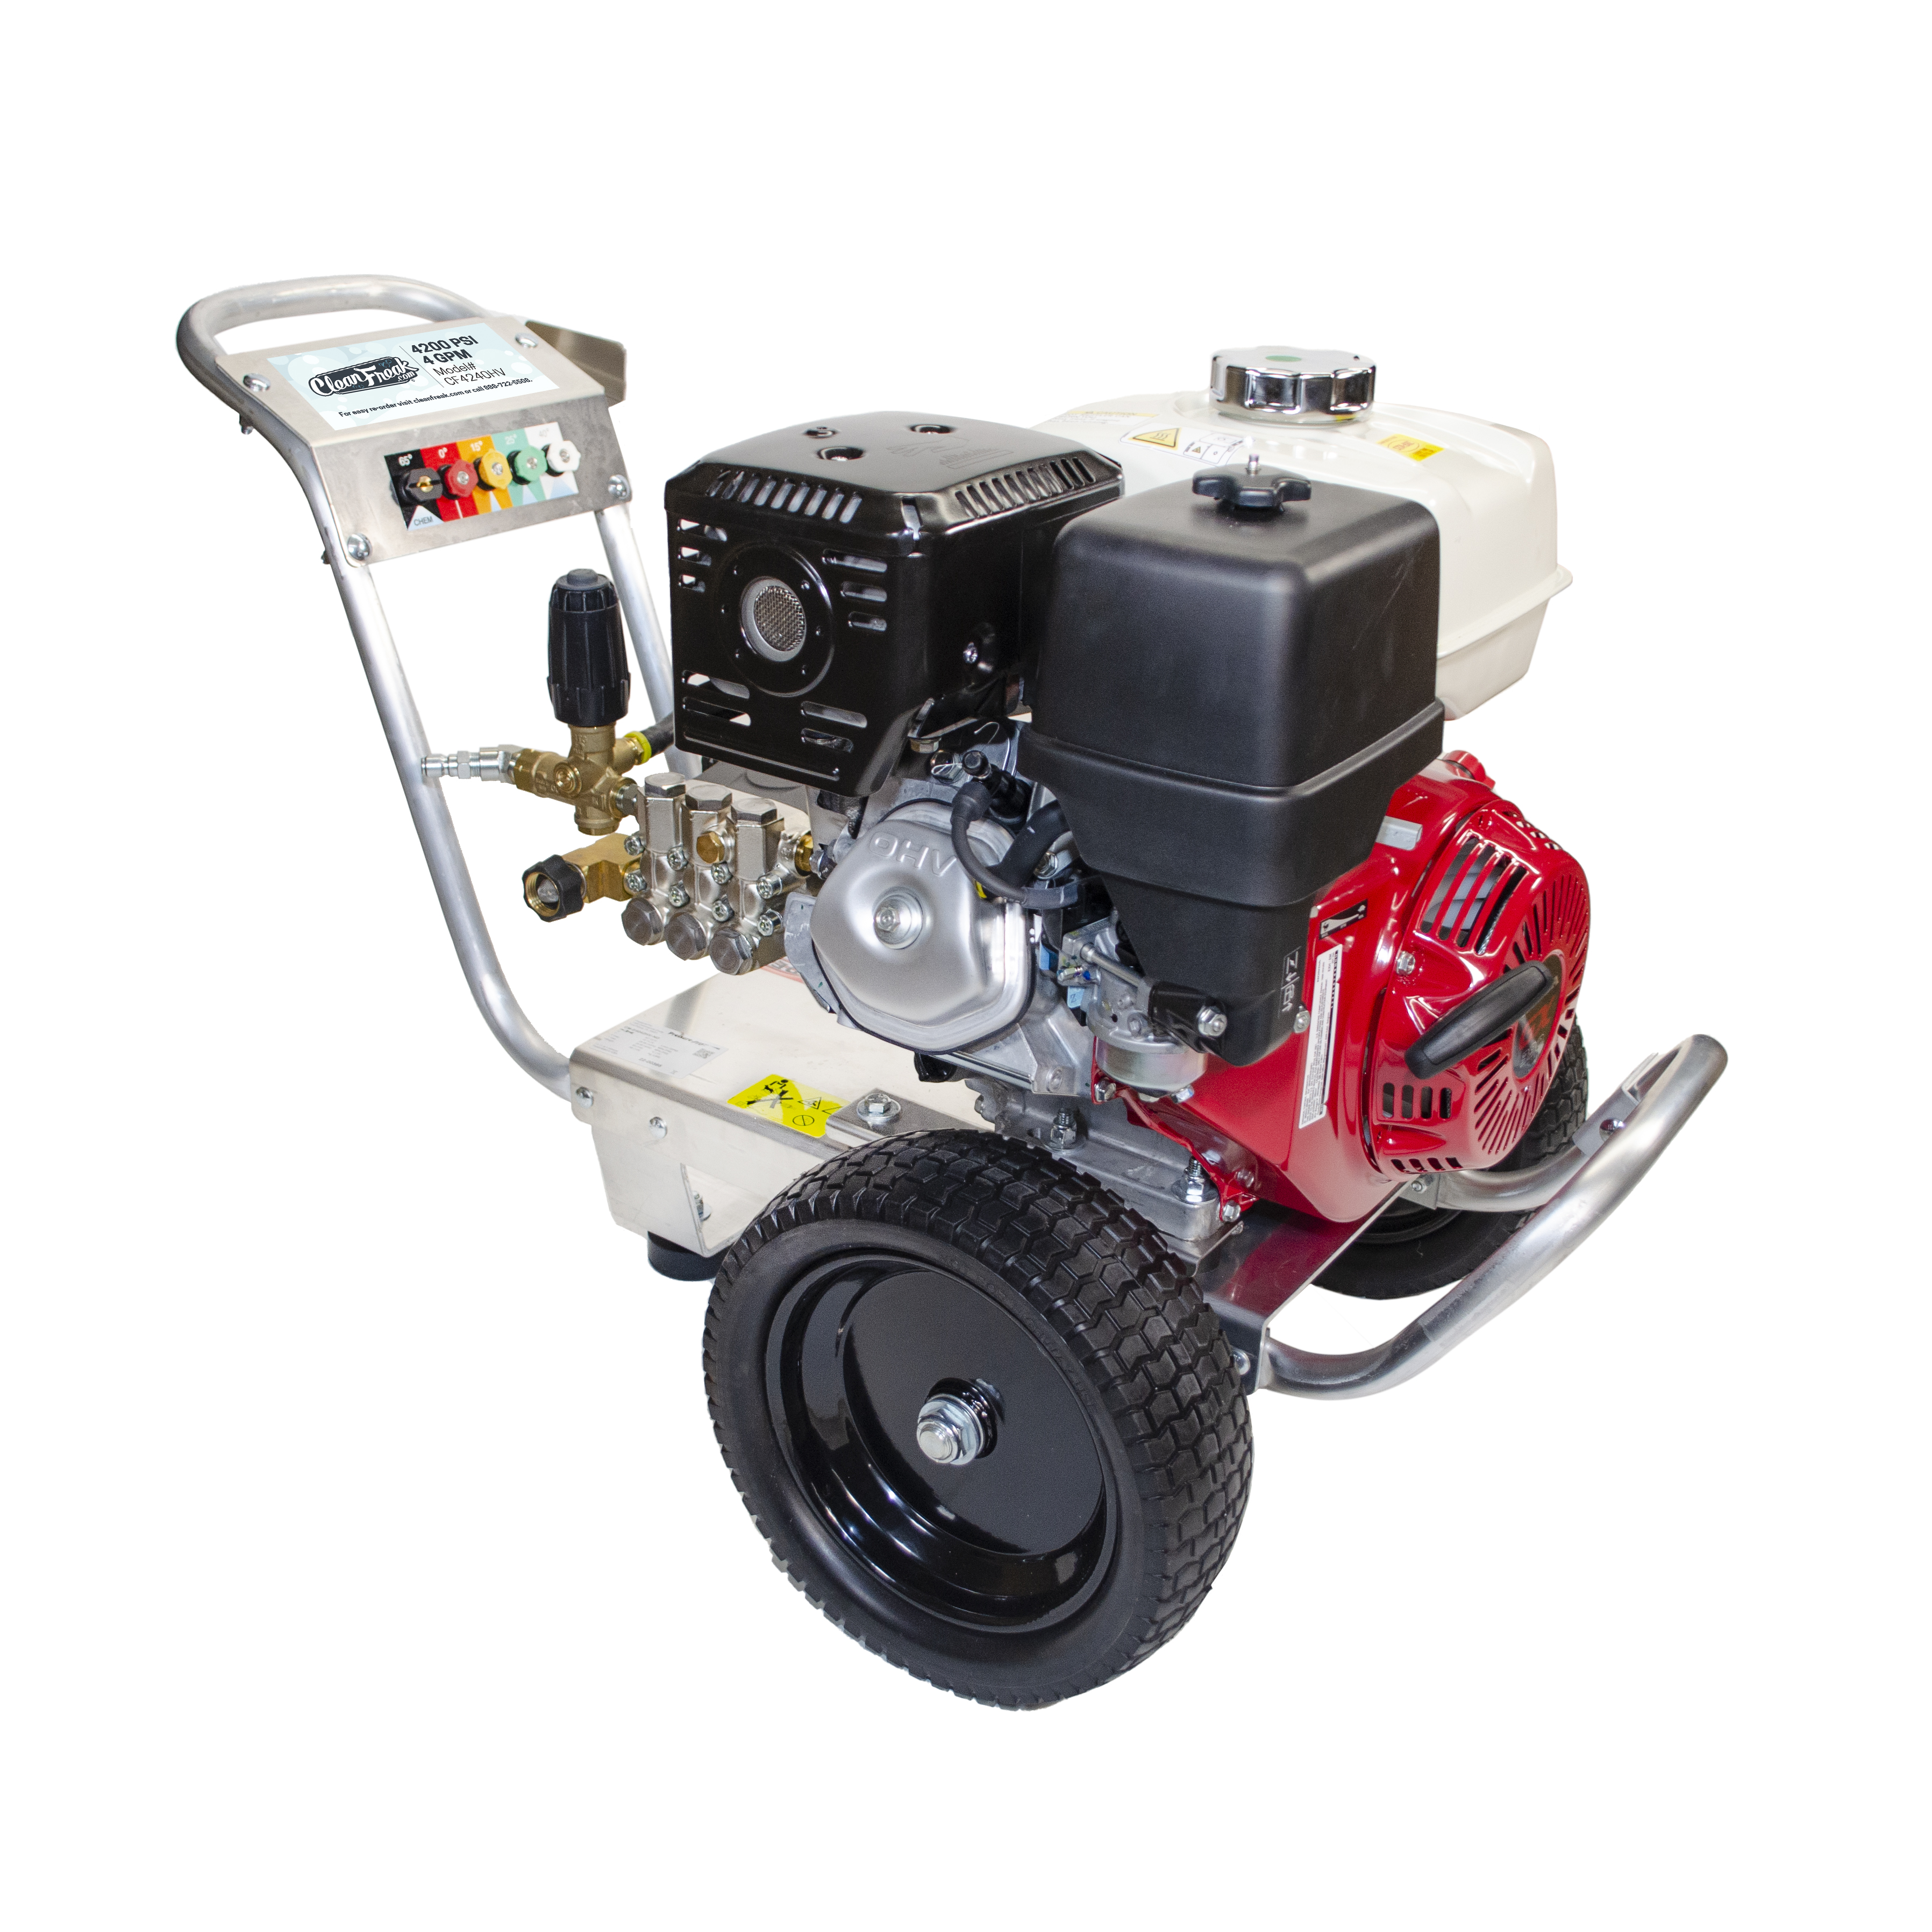 Professional-Duty Pressure Washer (Gas) - 4,200 PSI